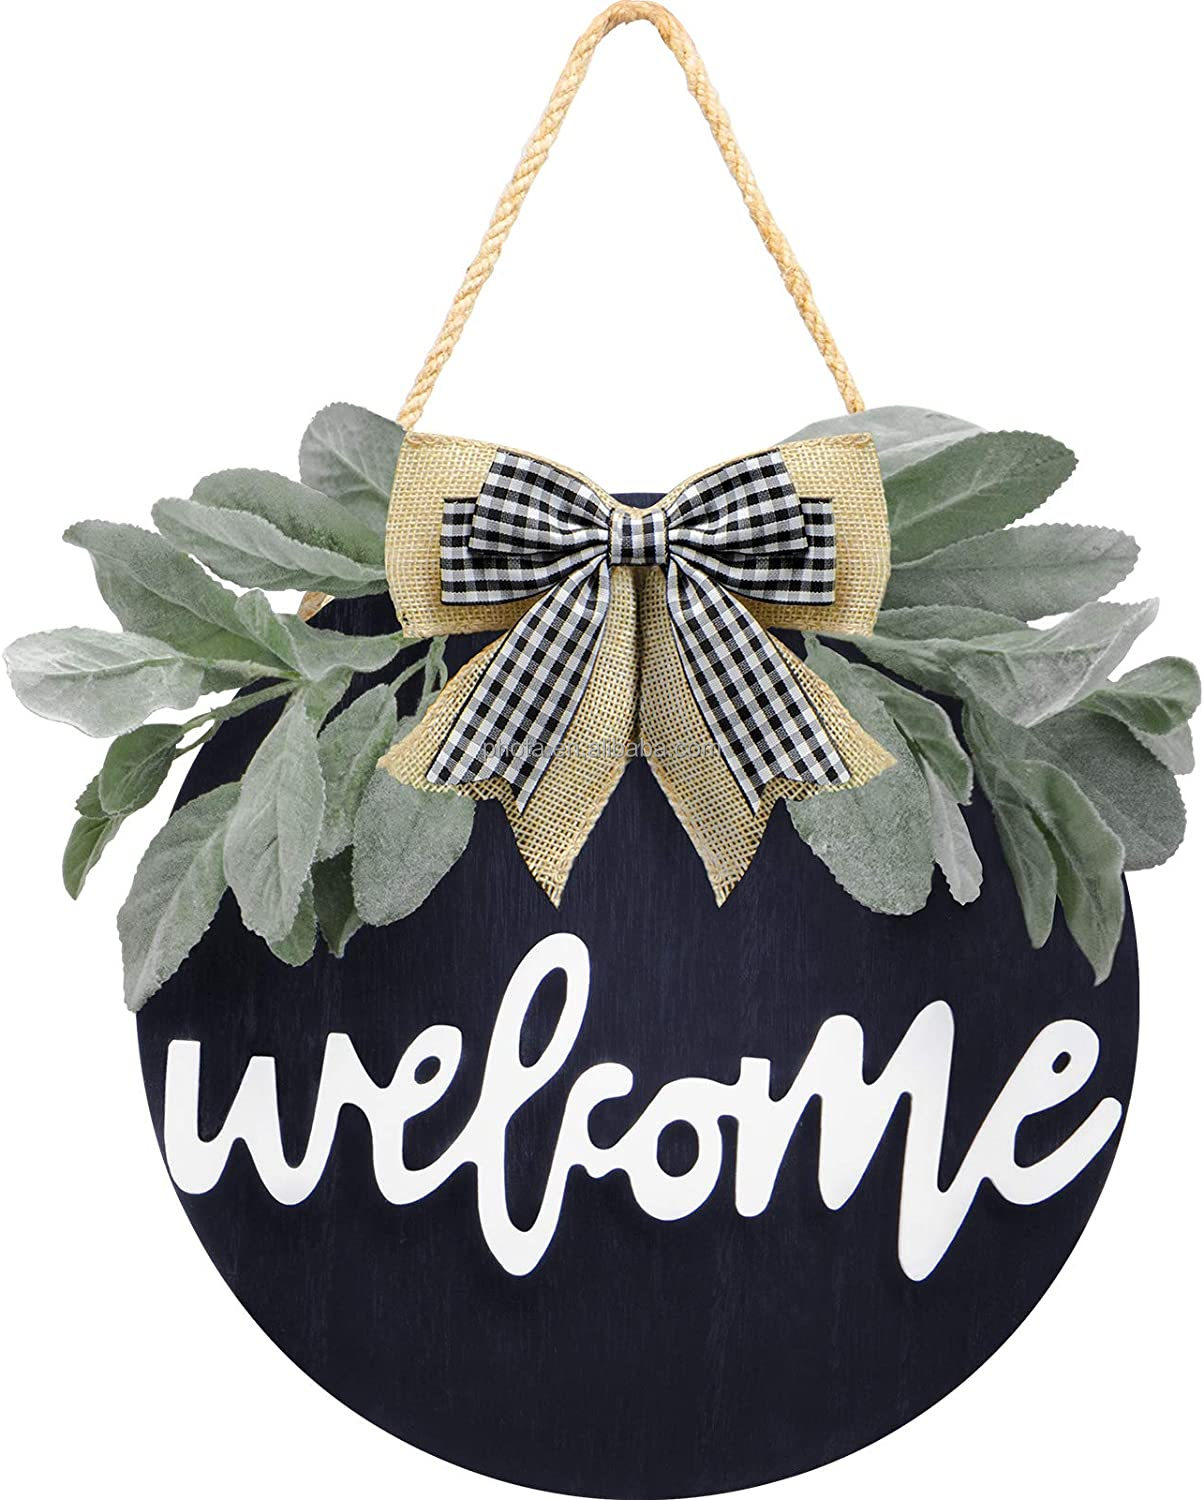 Welcome Home Sweet Home Sign for Front Porch Door Decor Farmhouse Wreath Sign